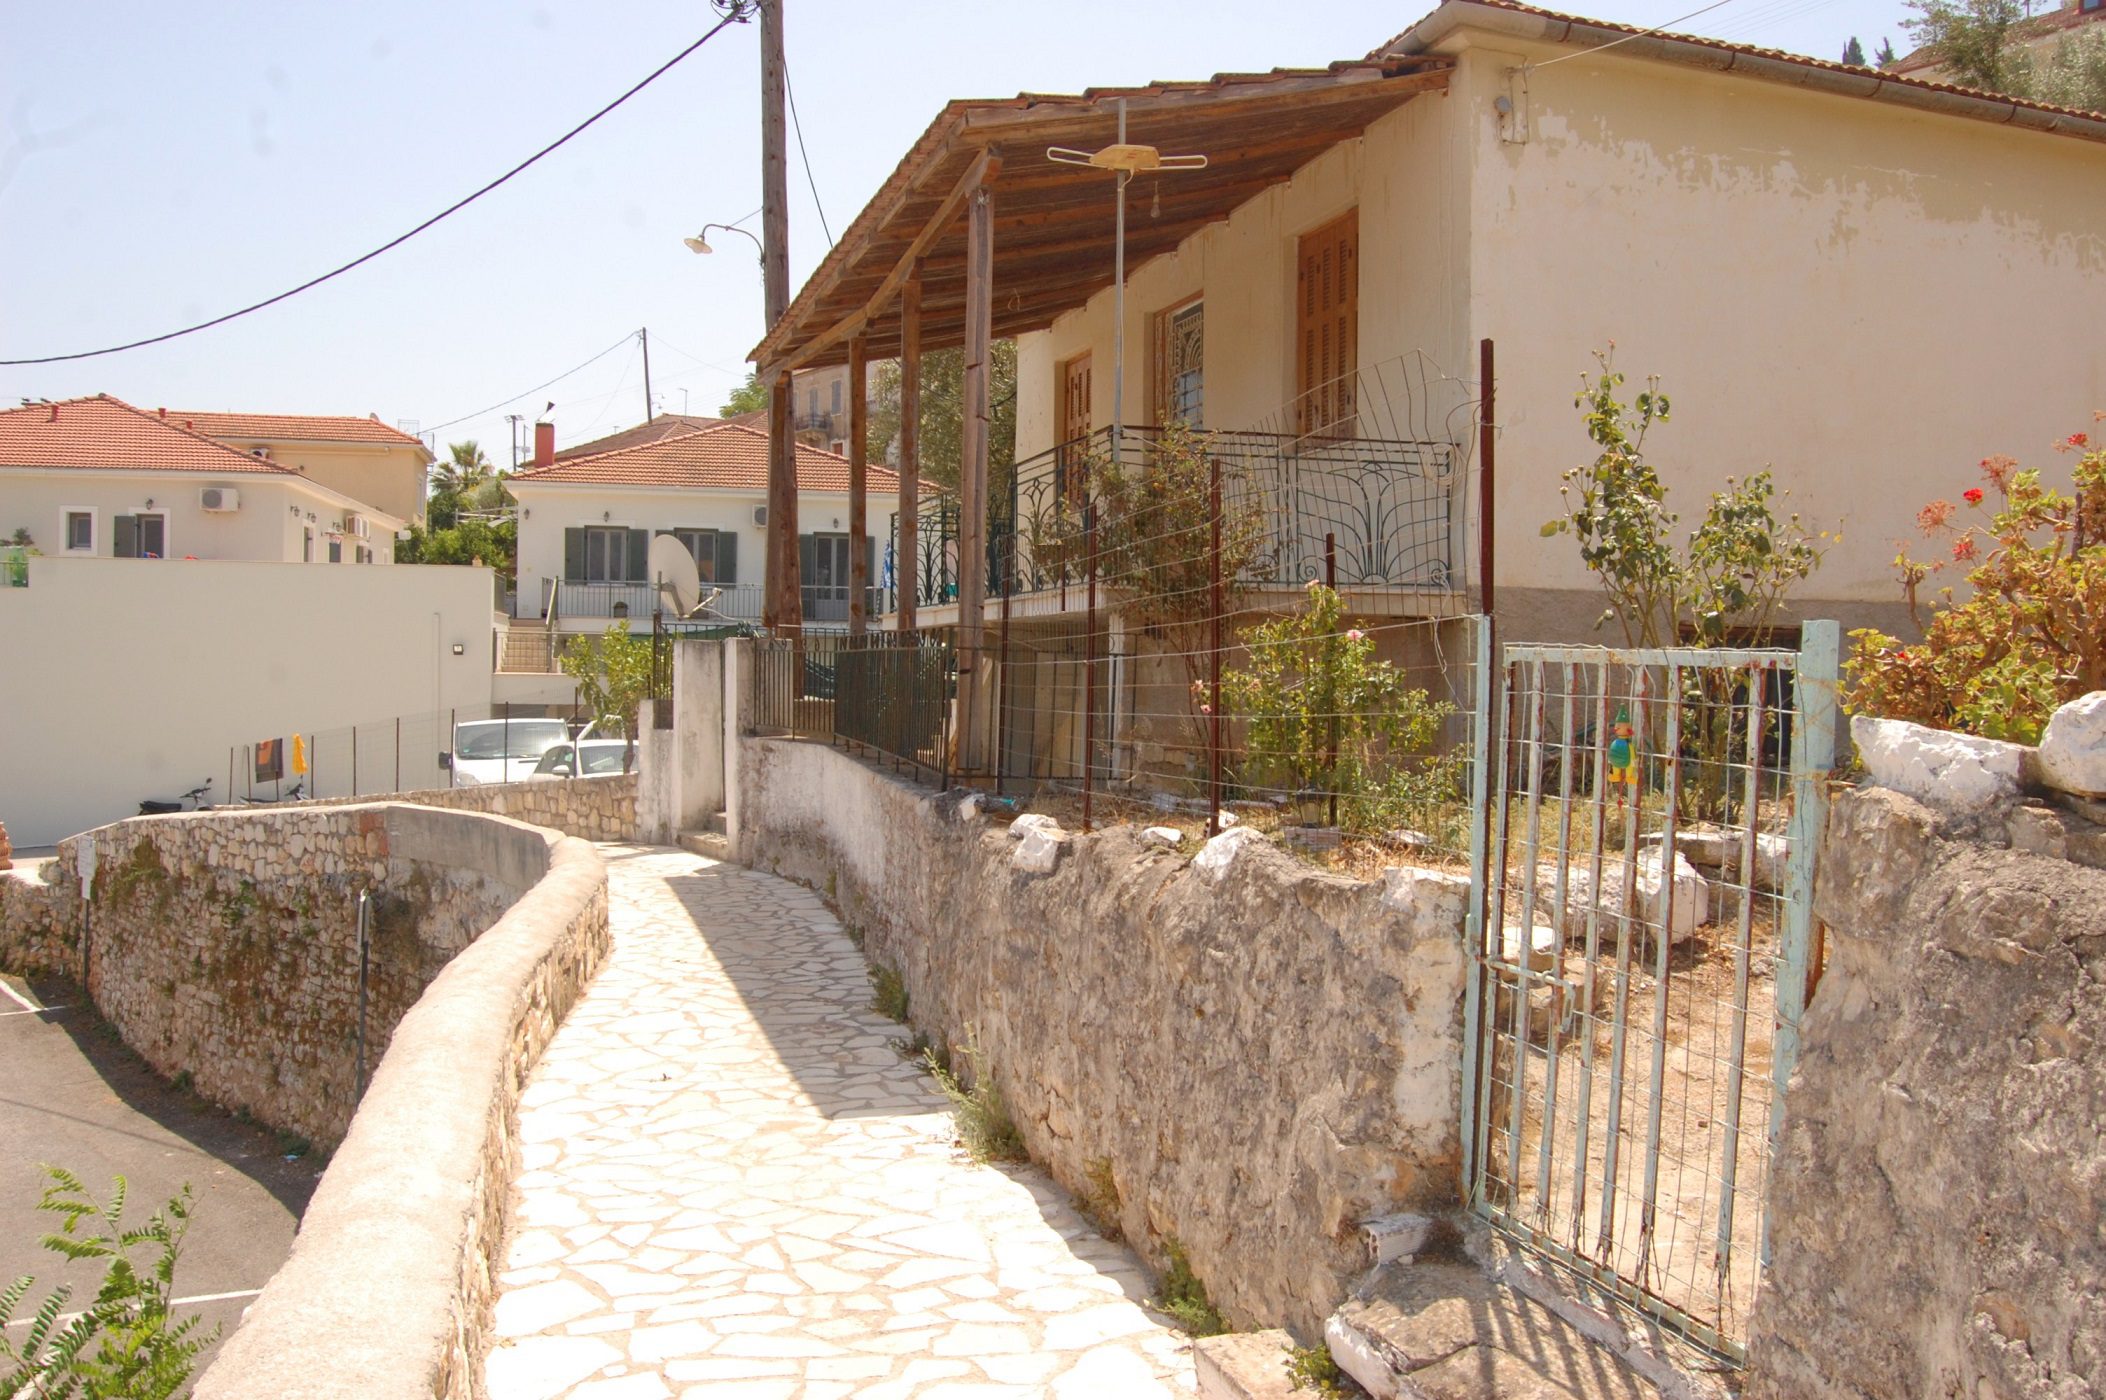 Entrance to land for sale in Ithaca Greece, Vathi